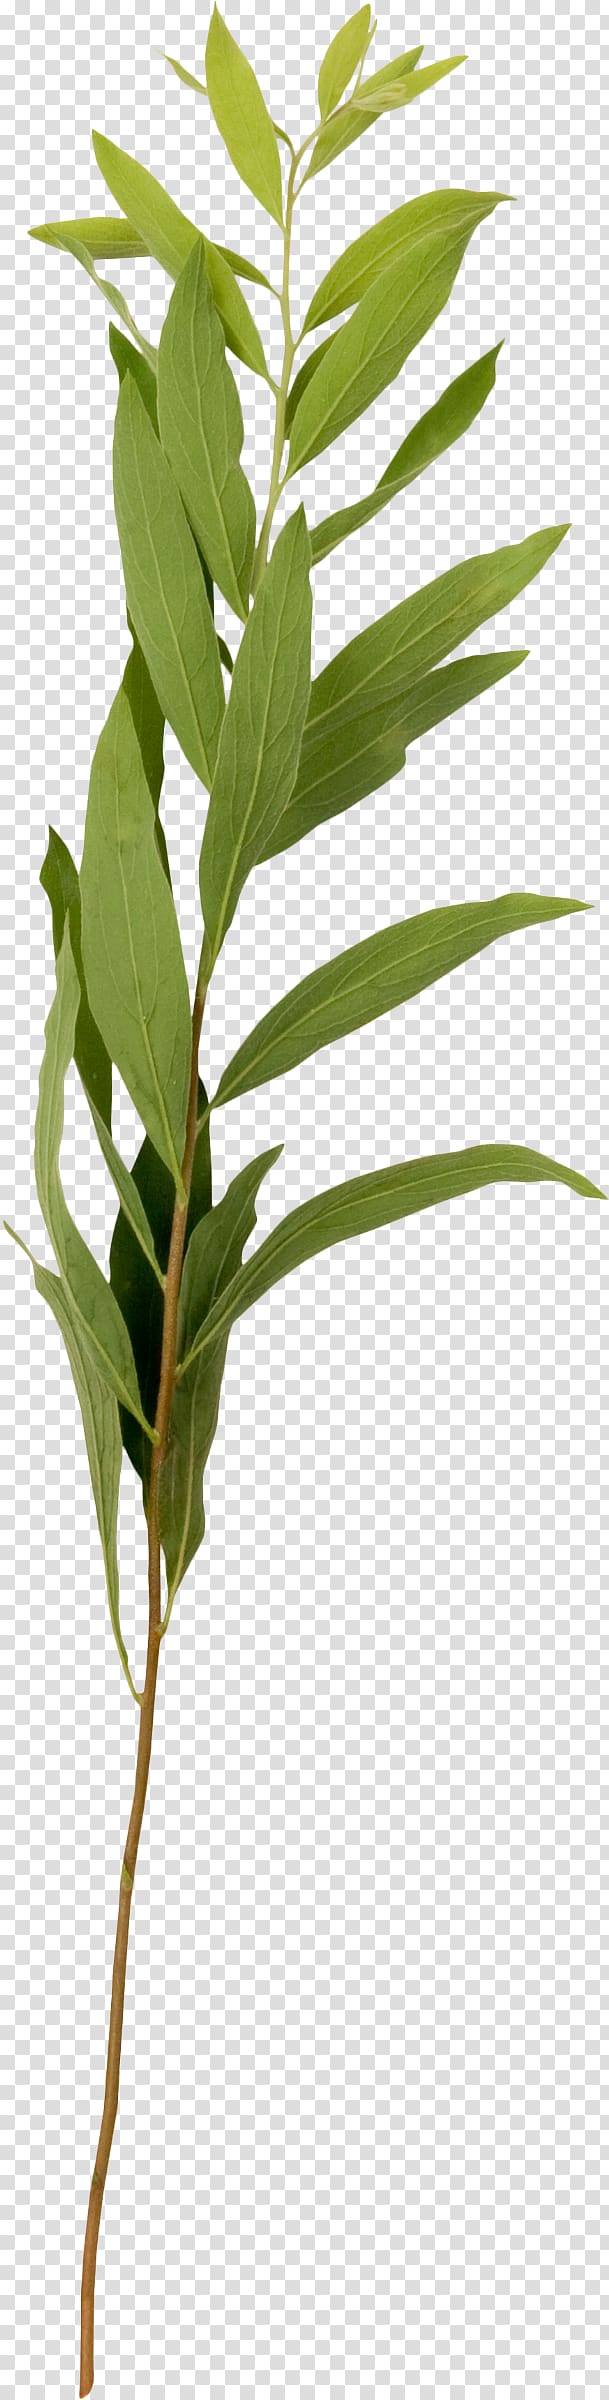 Plant Collage Yandex Search, greenery transparent background PNG clipart